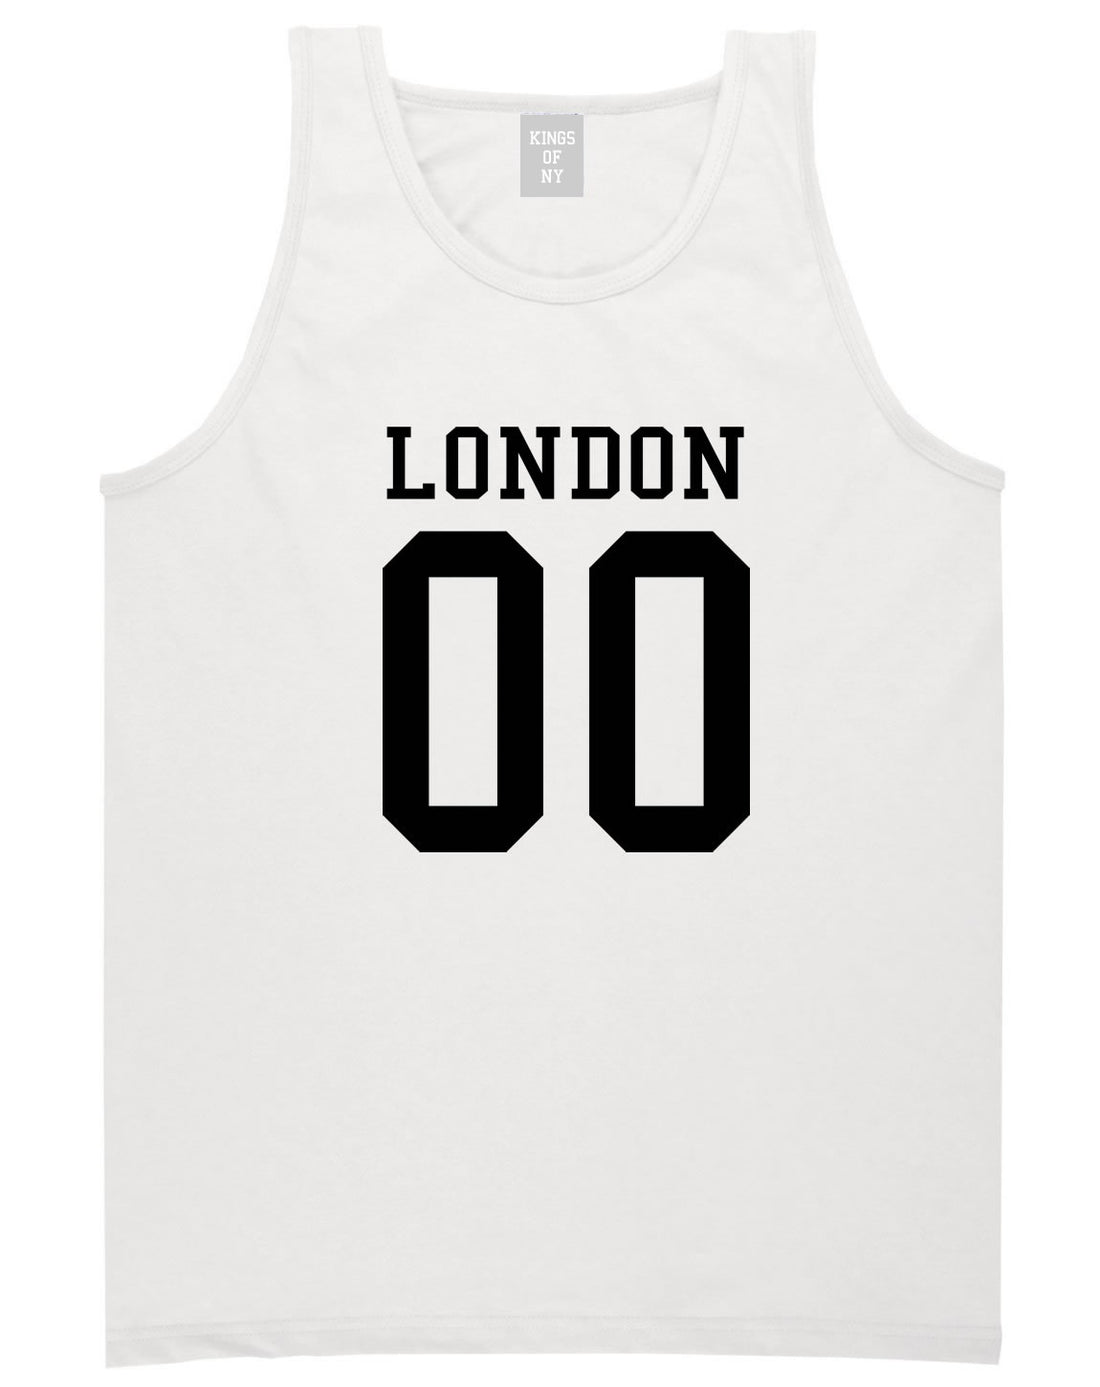 London Team 00 Jersey Tank Top in White By Kings Of NY